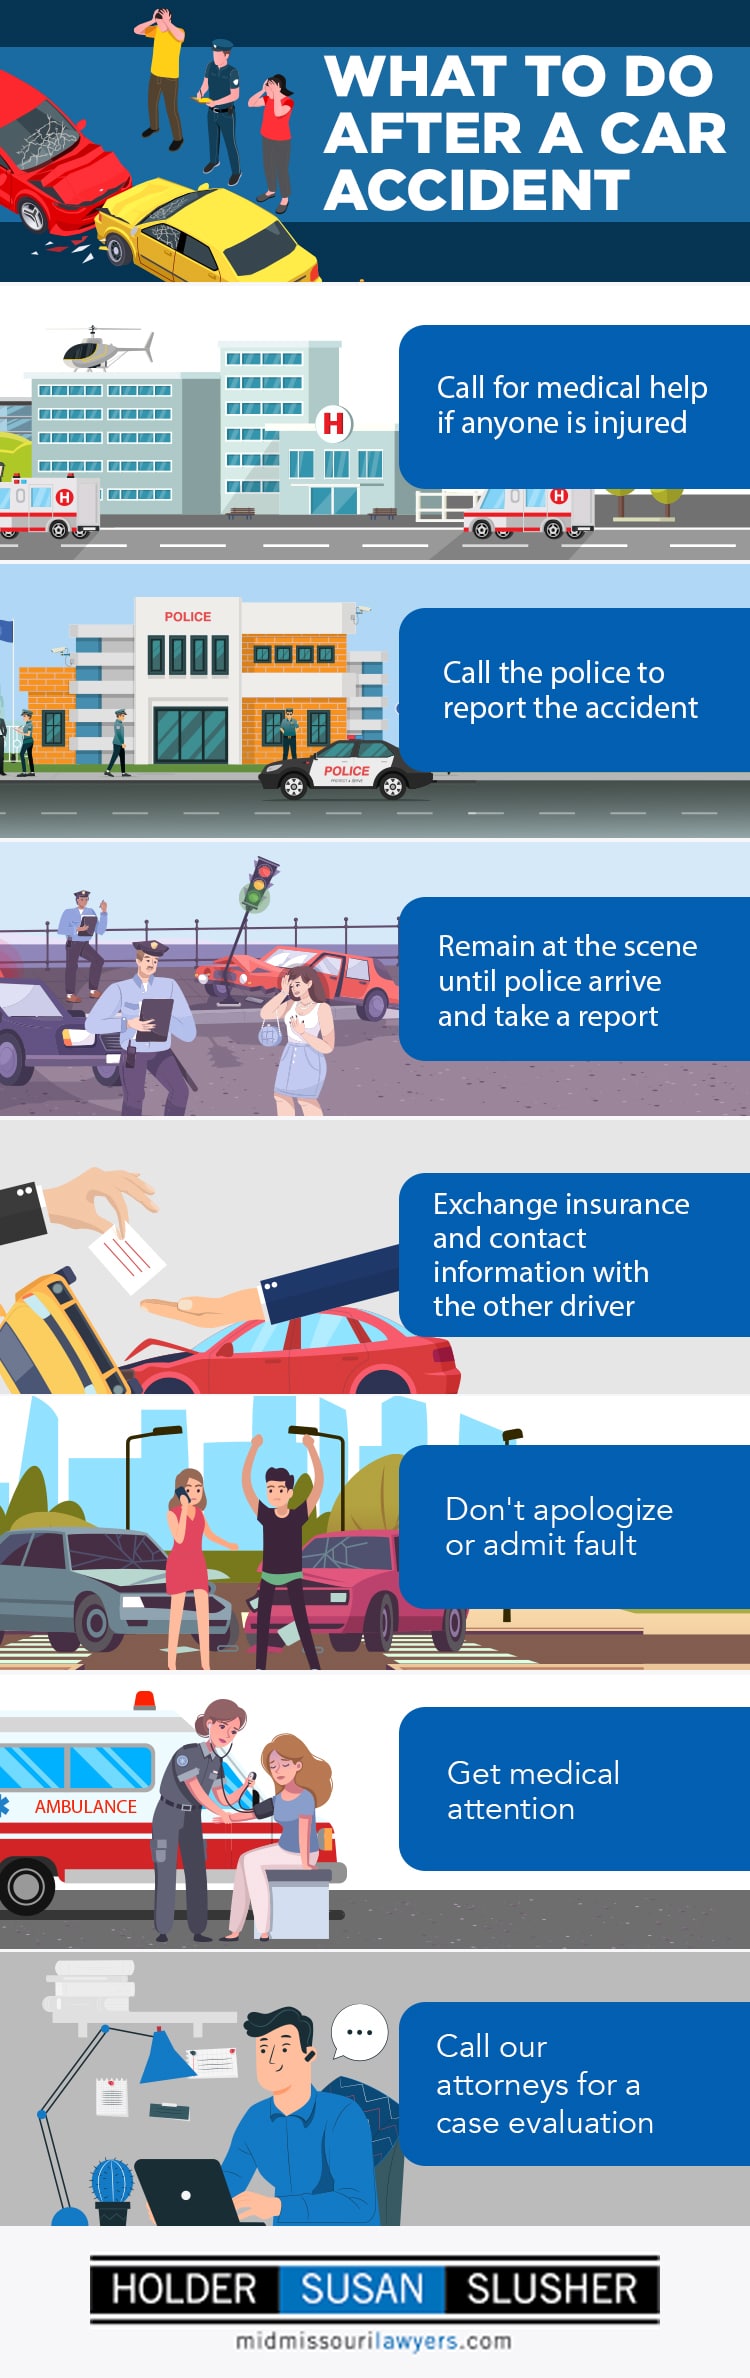 An infographic showing what to do after a car accident